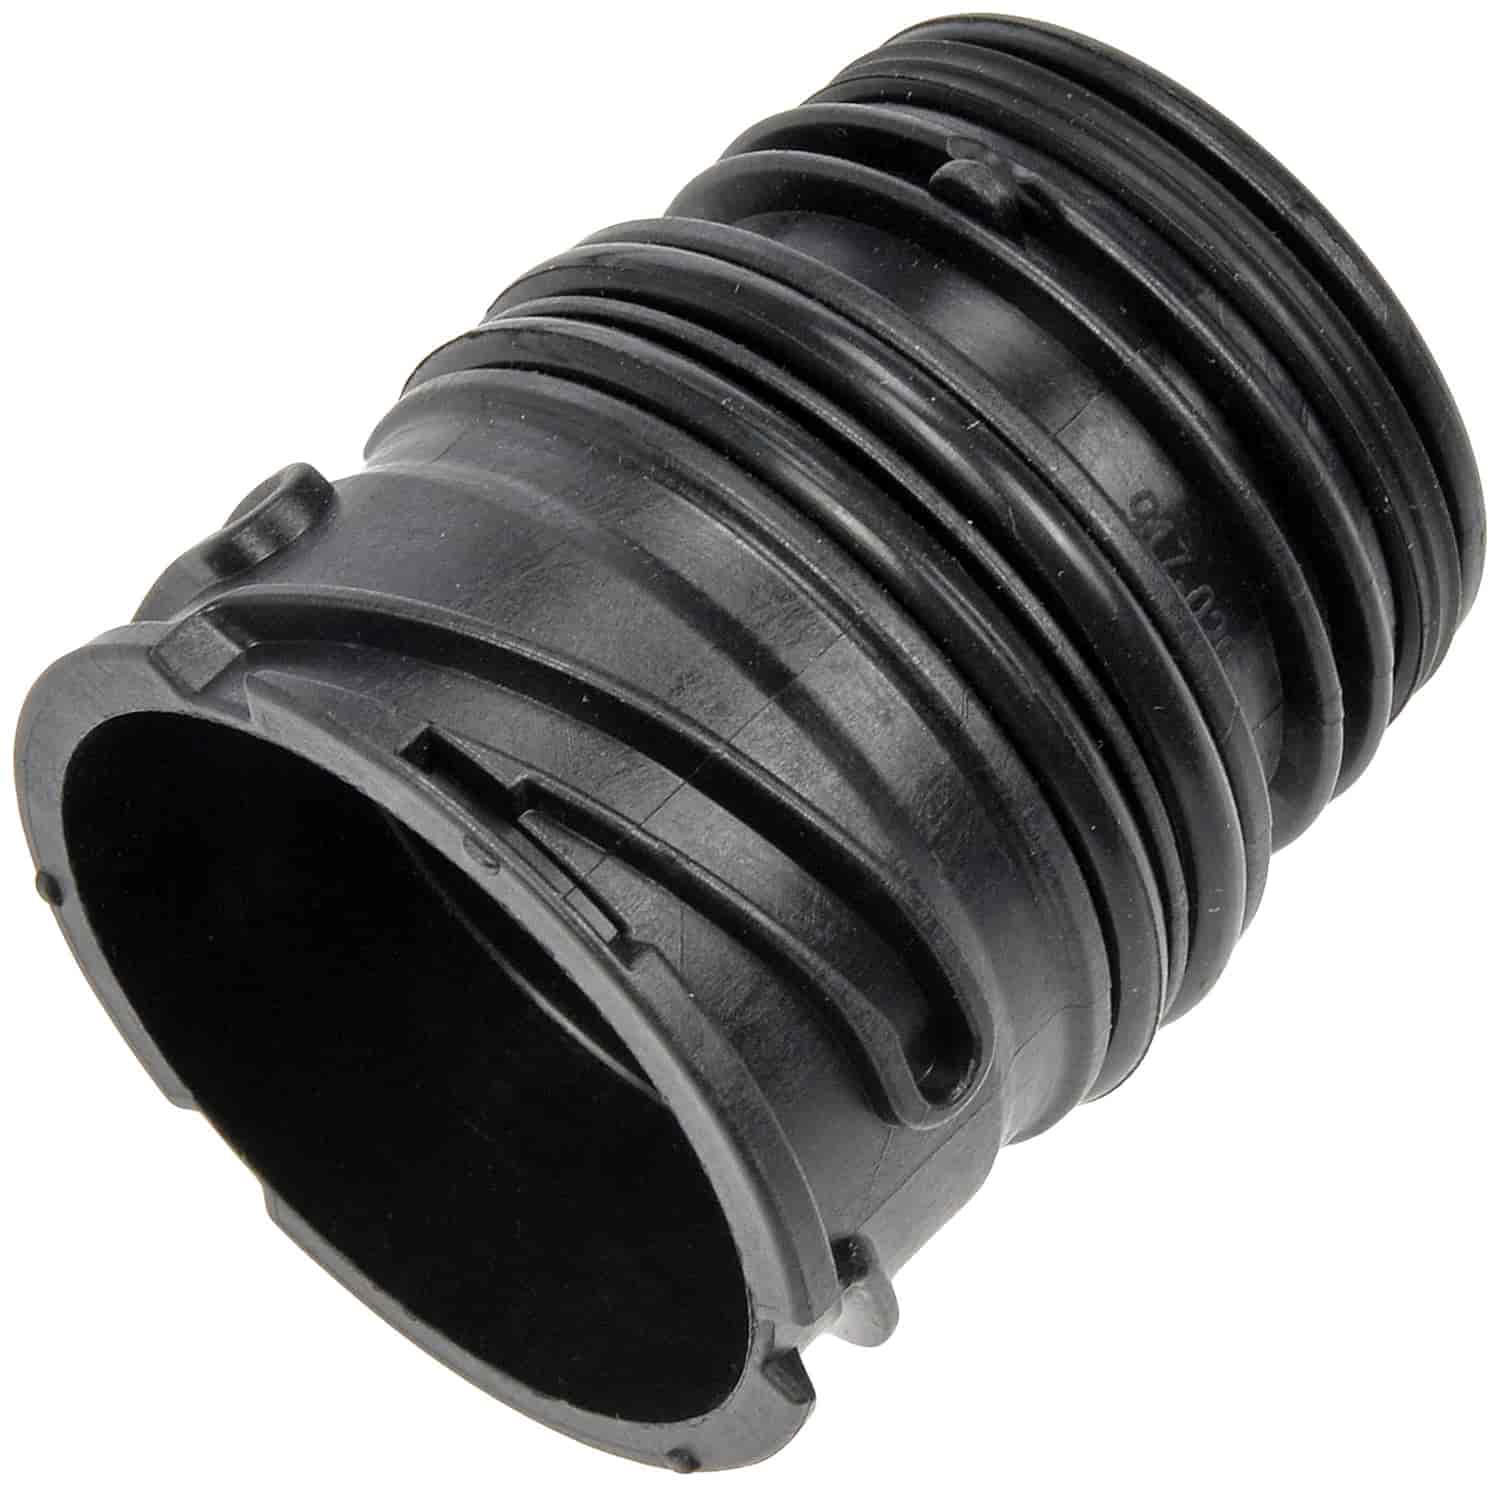 Transmission Electrical Connector Sealing Sleeve